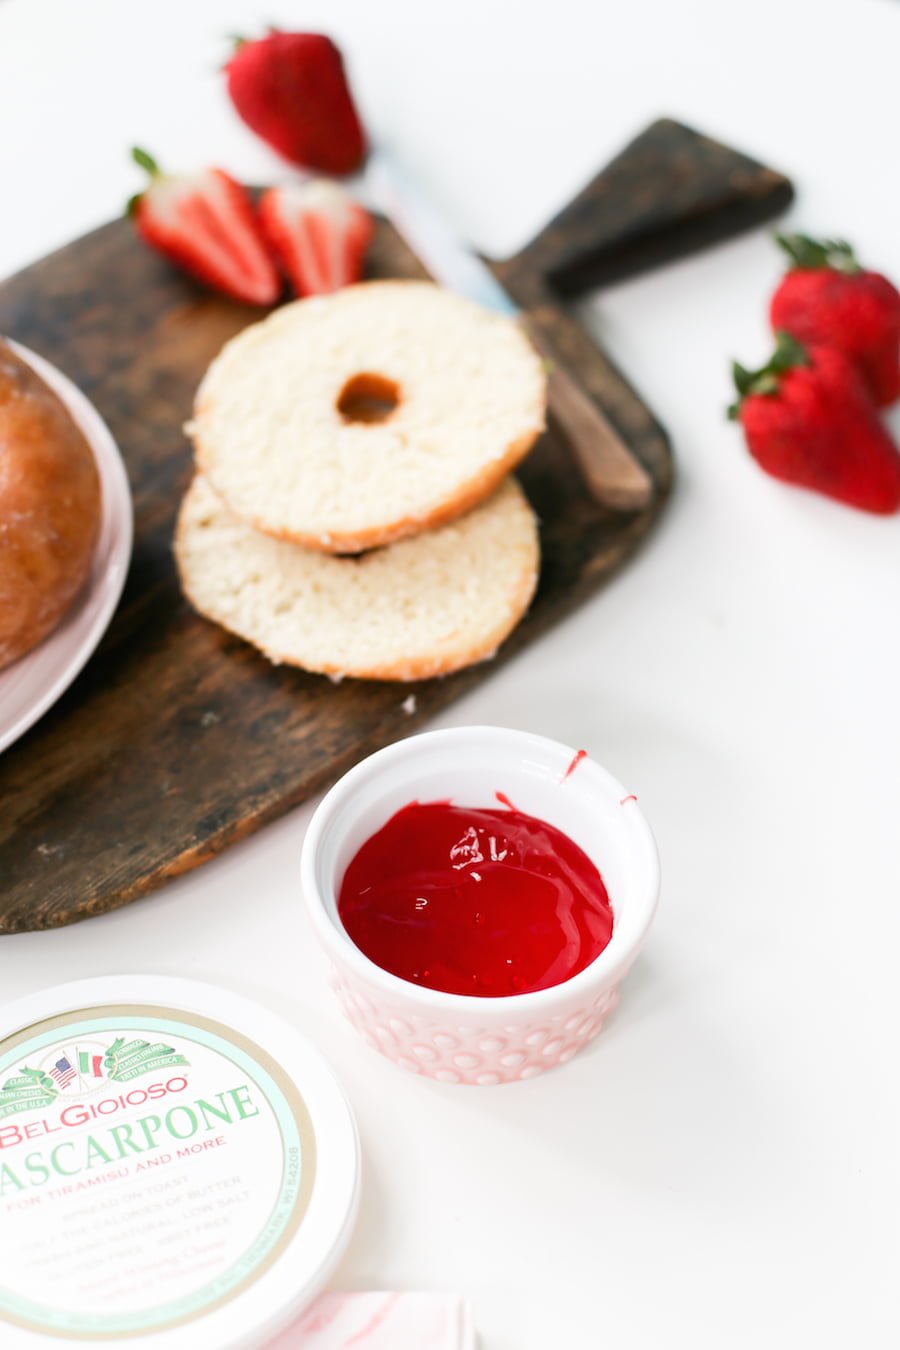 Celebrate Grilled Cheese Month with this Strawberry Mascarpone Grilled Cheese Donut for breakfast or dessert! // saltycanary.com